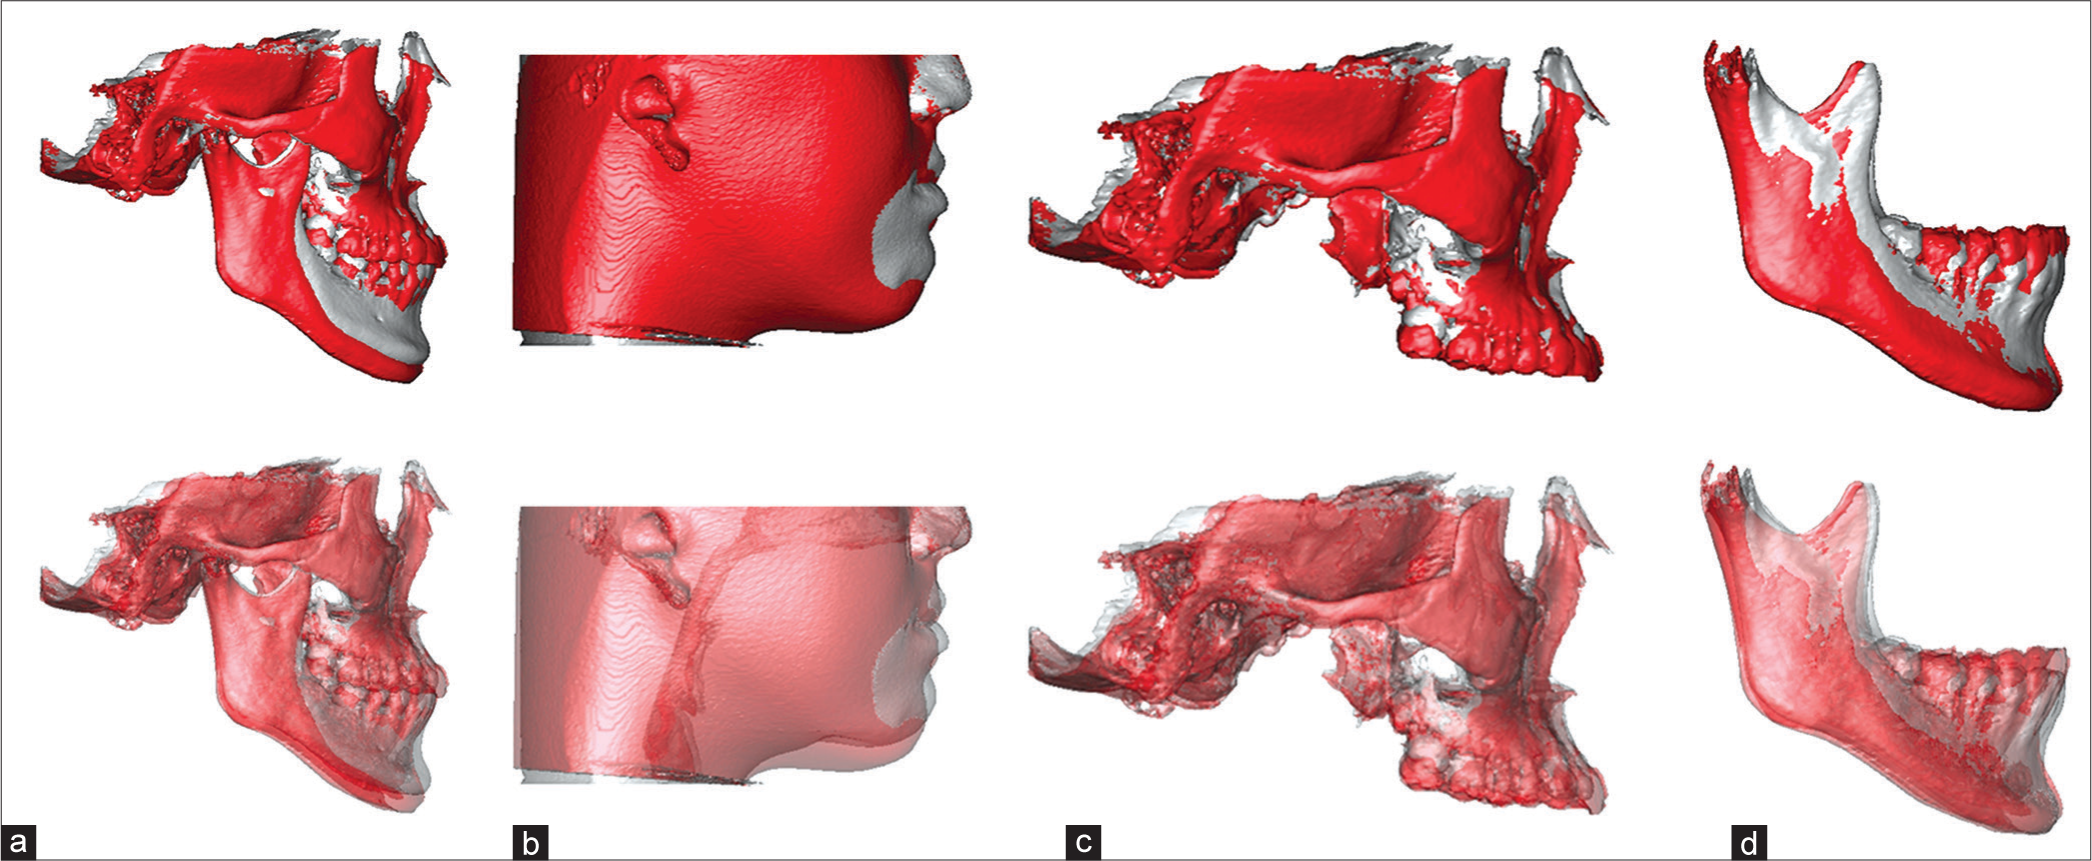 The three-dimensional superimpositions of the pretreatment (silver-gray color) and posttreatment (red color) cone-beam computer tomography images of the Technique-1 case report in Figure 1. (a) The overall skeletal superimposition on cranial base revealed the mandible was clockwise rotated 2.9°, downward 5.5 mm, and backward 3.2 mm; (b) The overall soft-tissue superimposition based on overall skeletal superimposition on cranial base revealed the soft-tissue chin project was reduced 3.4 mm; (c) The cranial base superimposition without mandible revealed the maxillary dentition was extruded 2.5-4.3 mm; (d) The mandibular superimposition illustrated the lower dentition was extruded 1.8–5.5 mm, and the mandible grew 3.3 mm